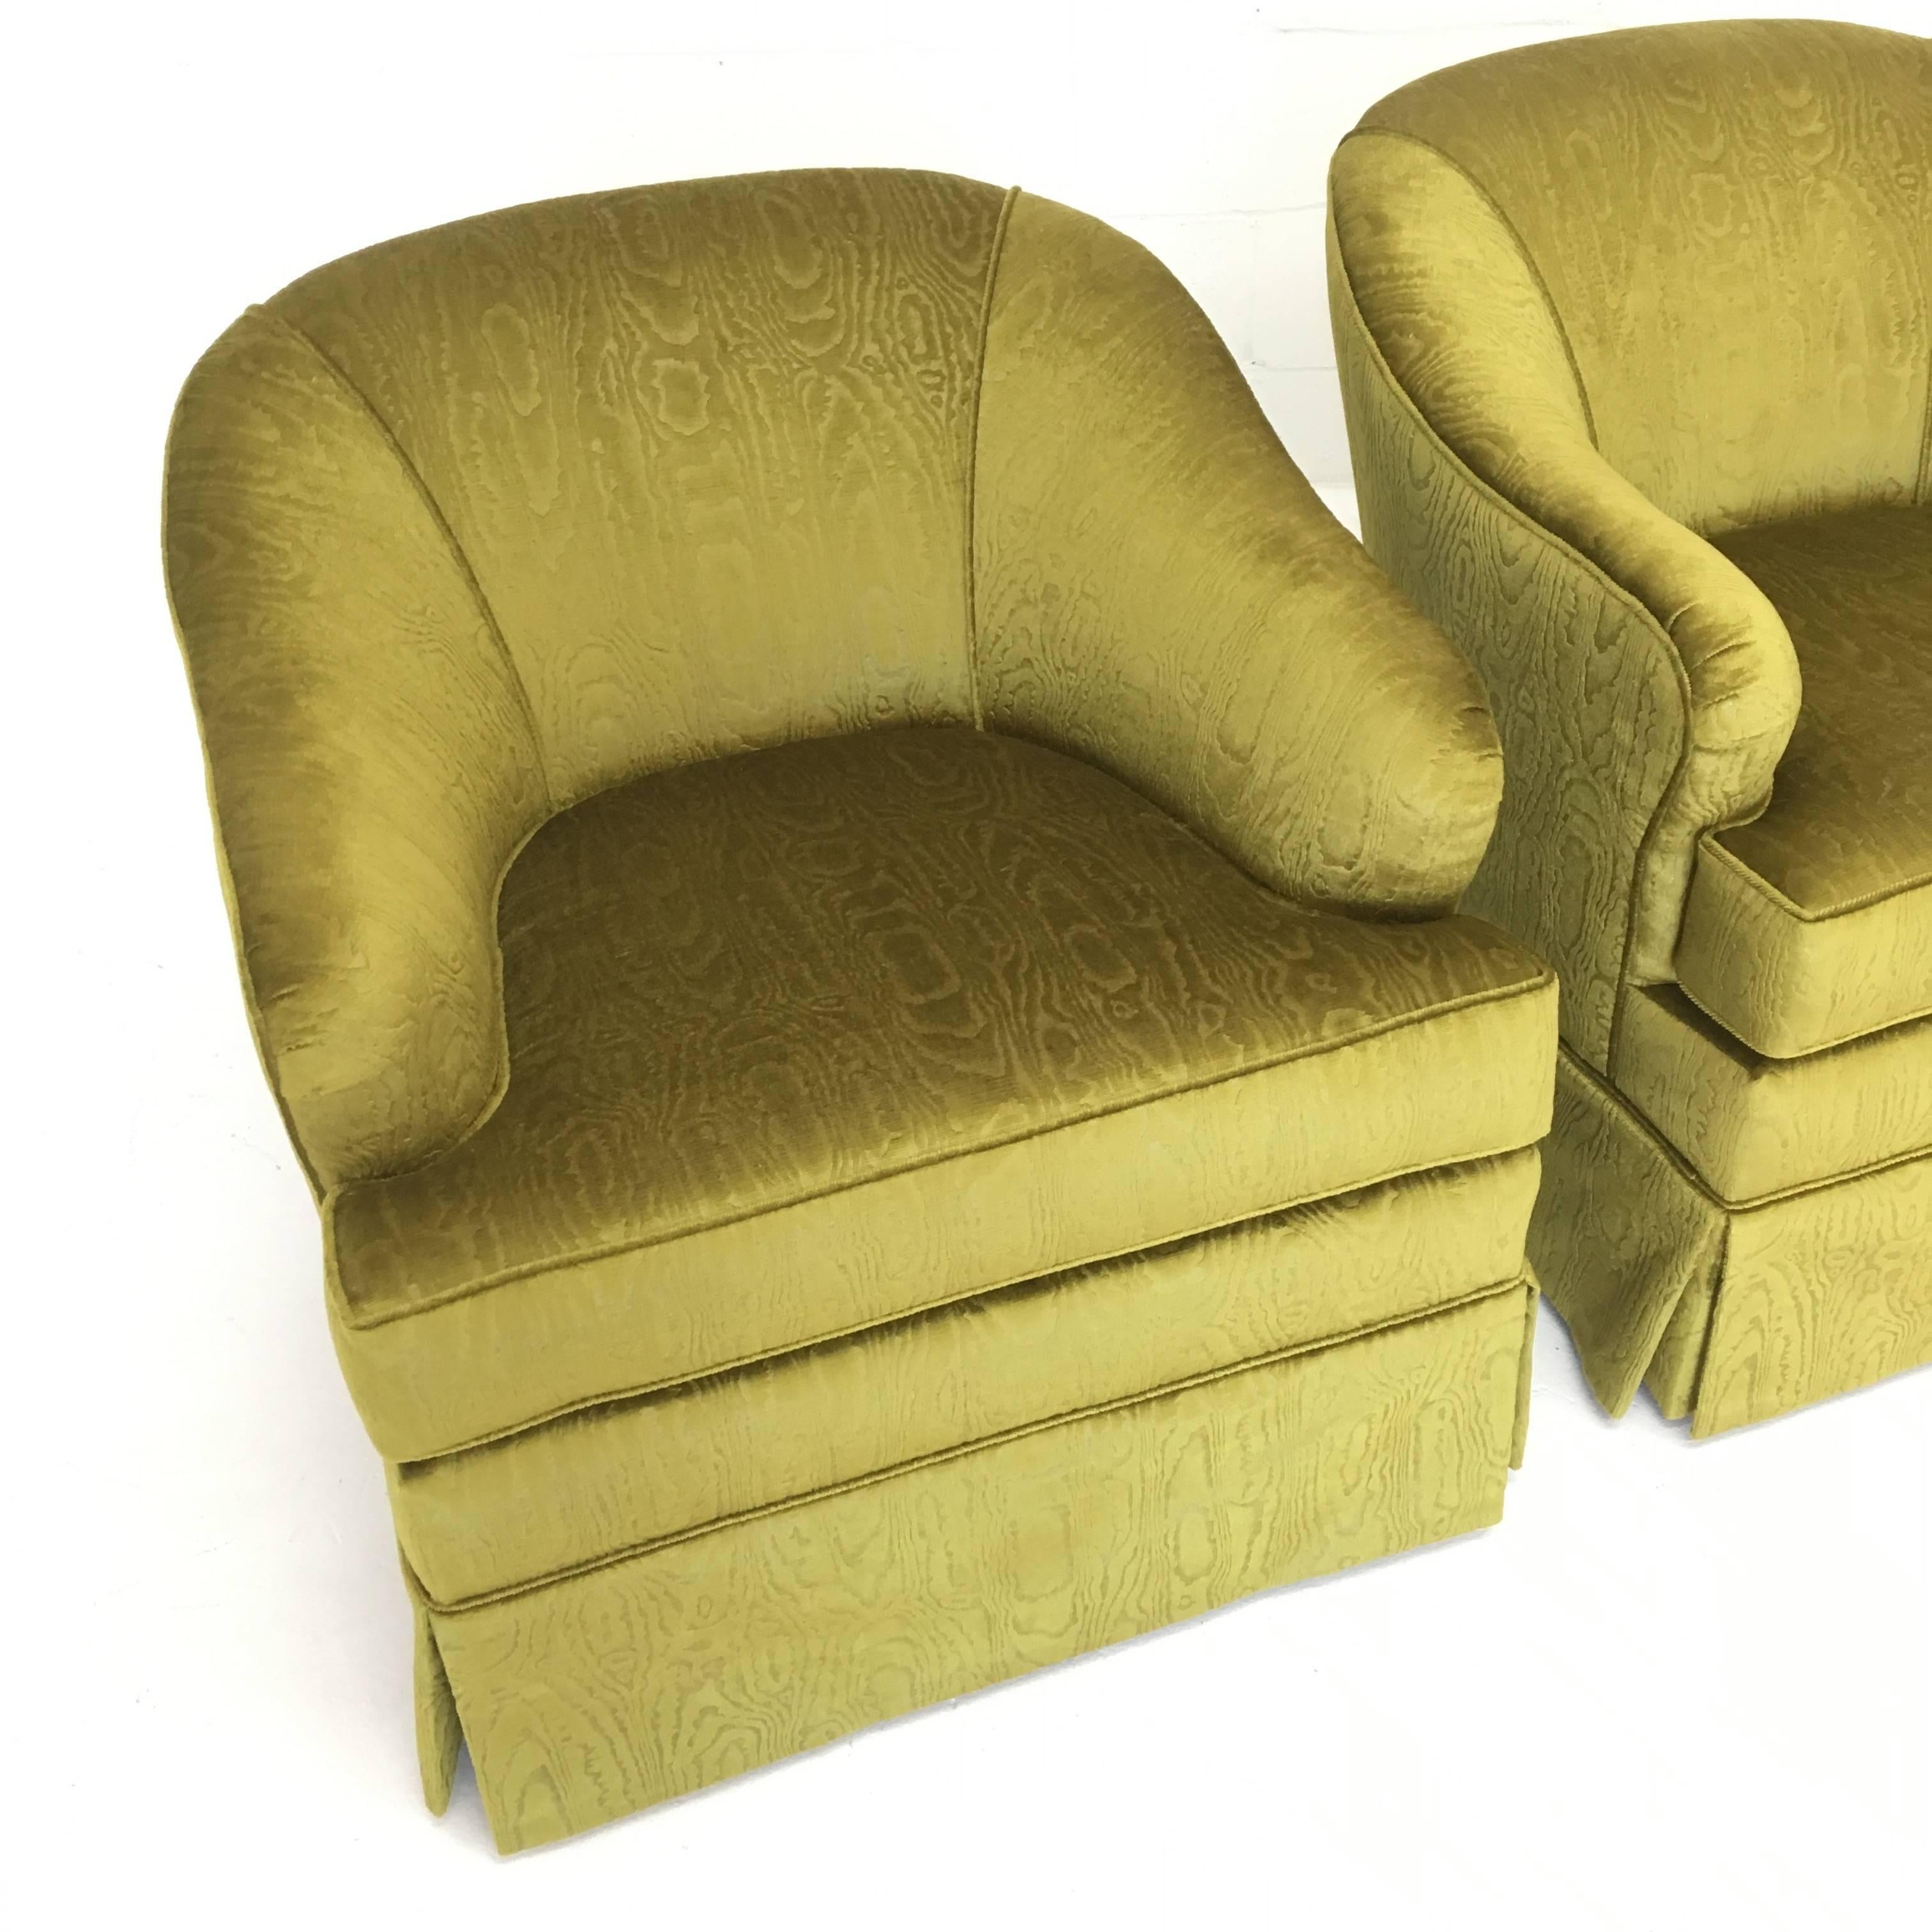 Mid-Century Hollywood Regency style club chairs. Newly upholstered in vibrant chartreuse moire velvet. Fabric swatch available.